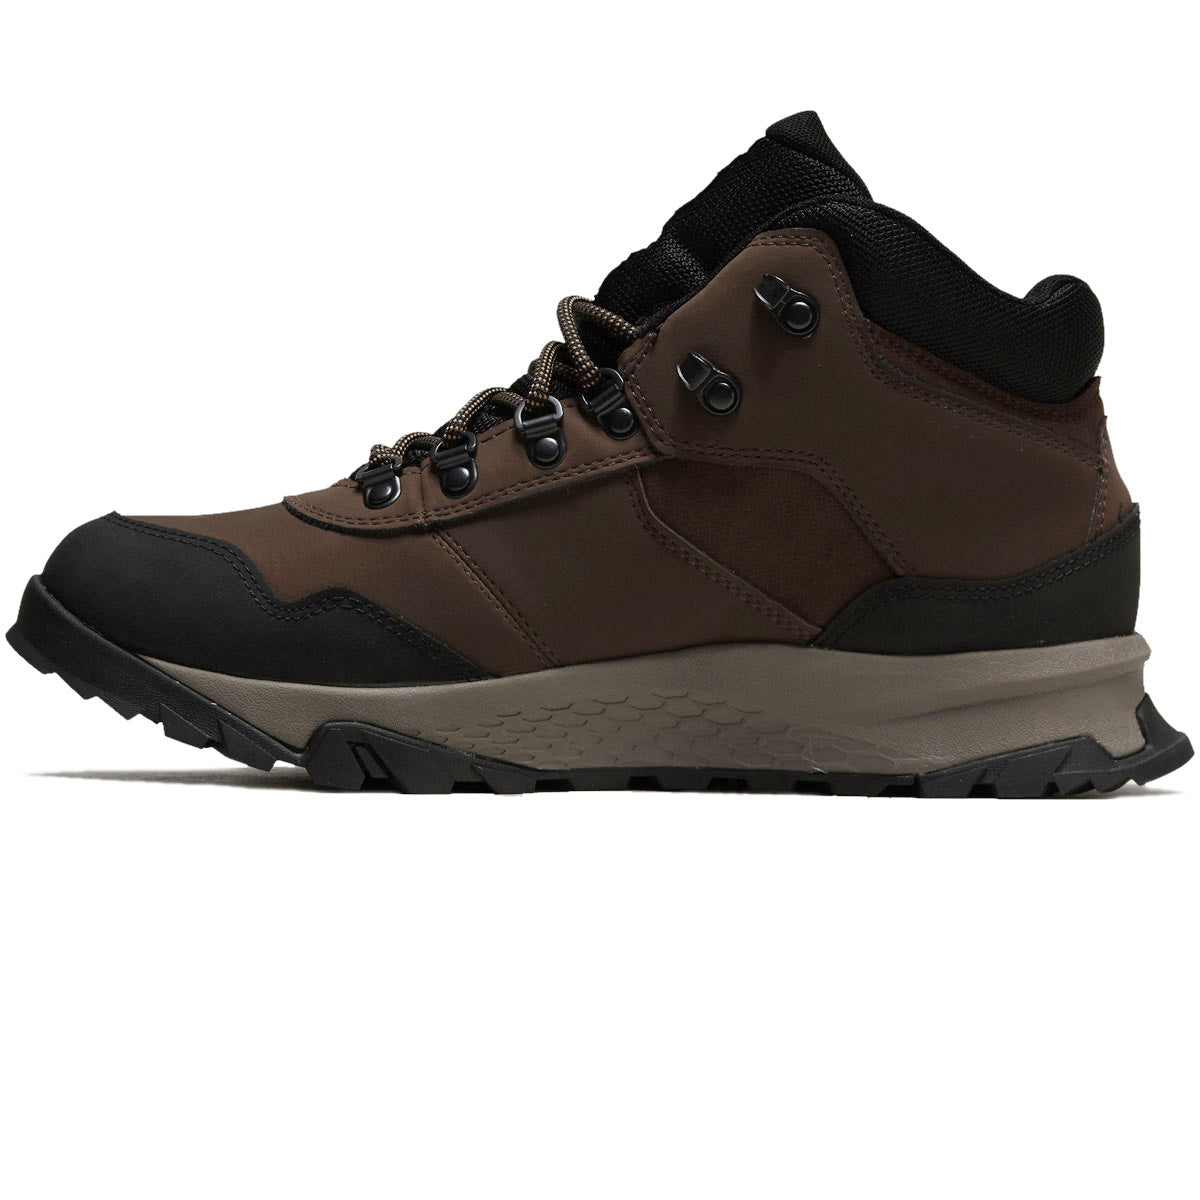 Timberland Lincoln Peak Mid Wp Boots - Dark Brown Leather image 2